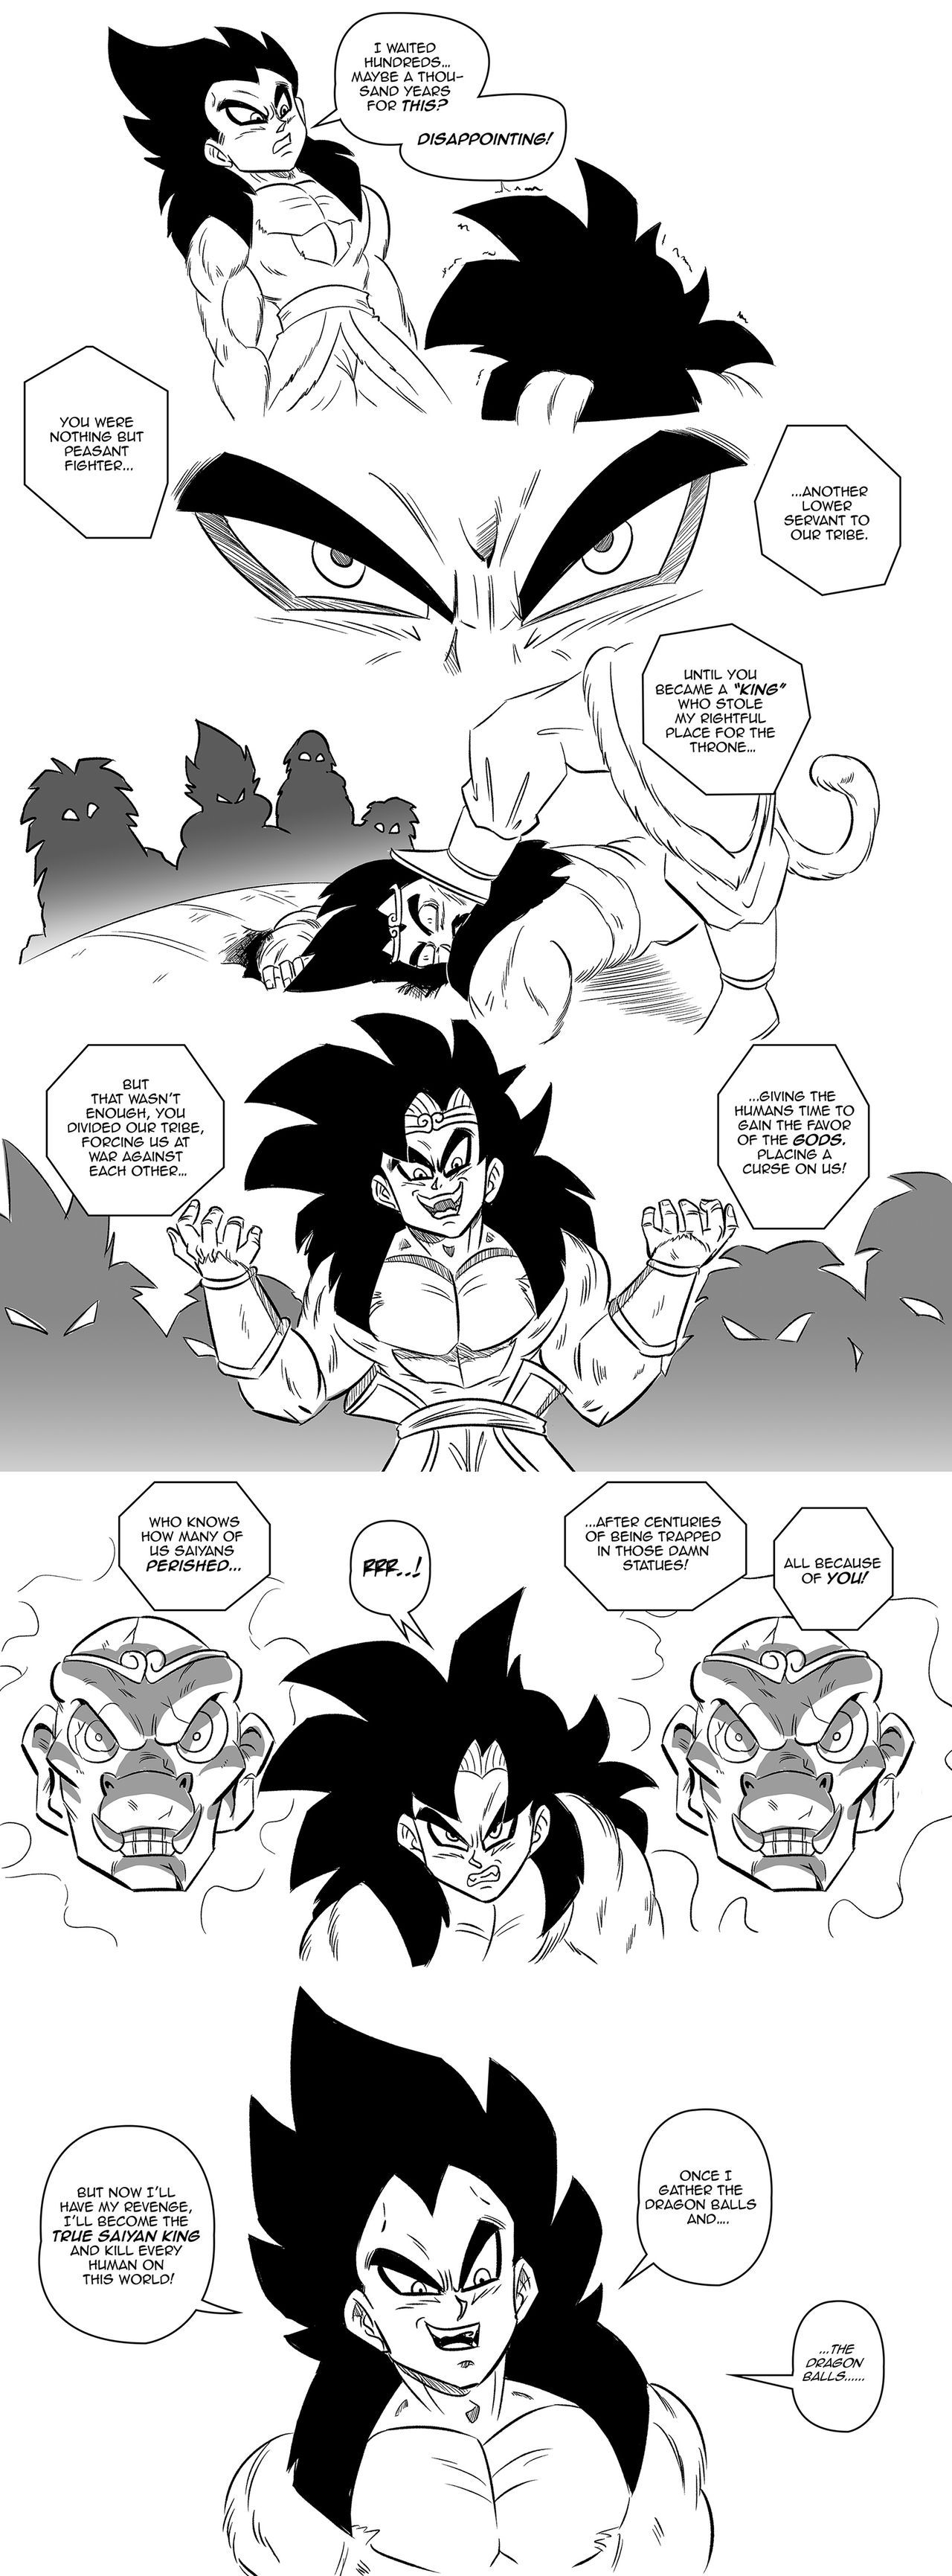 [FunsexyDB] Mate of the Monkey King #2 (Dragon Ball) [Ongoing] 28